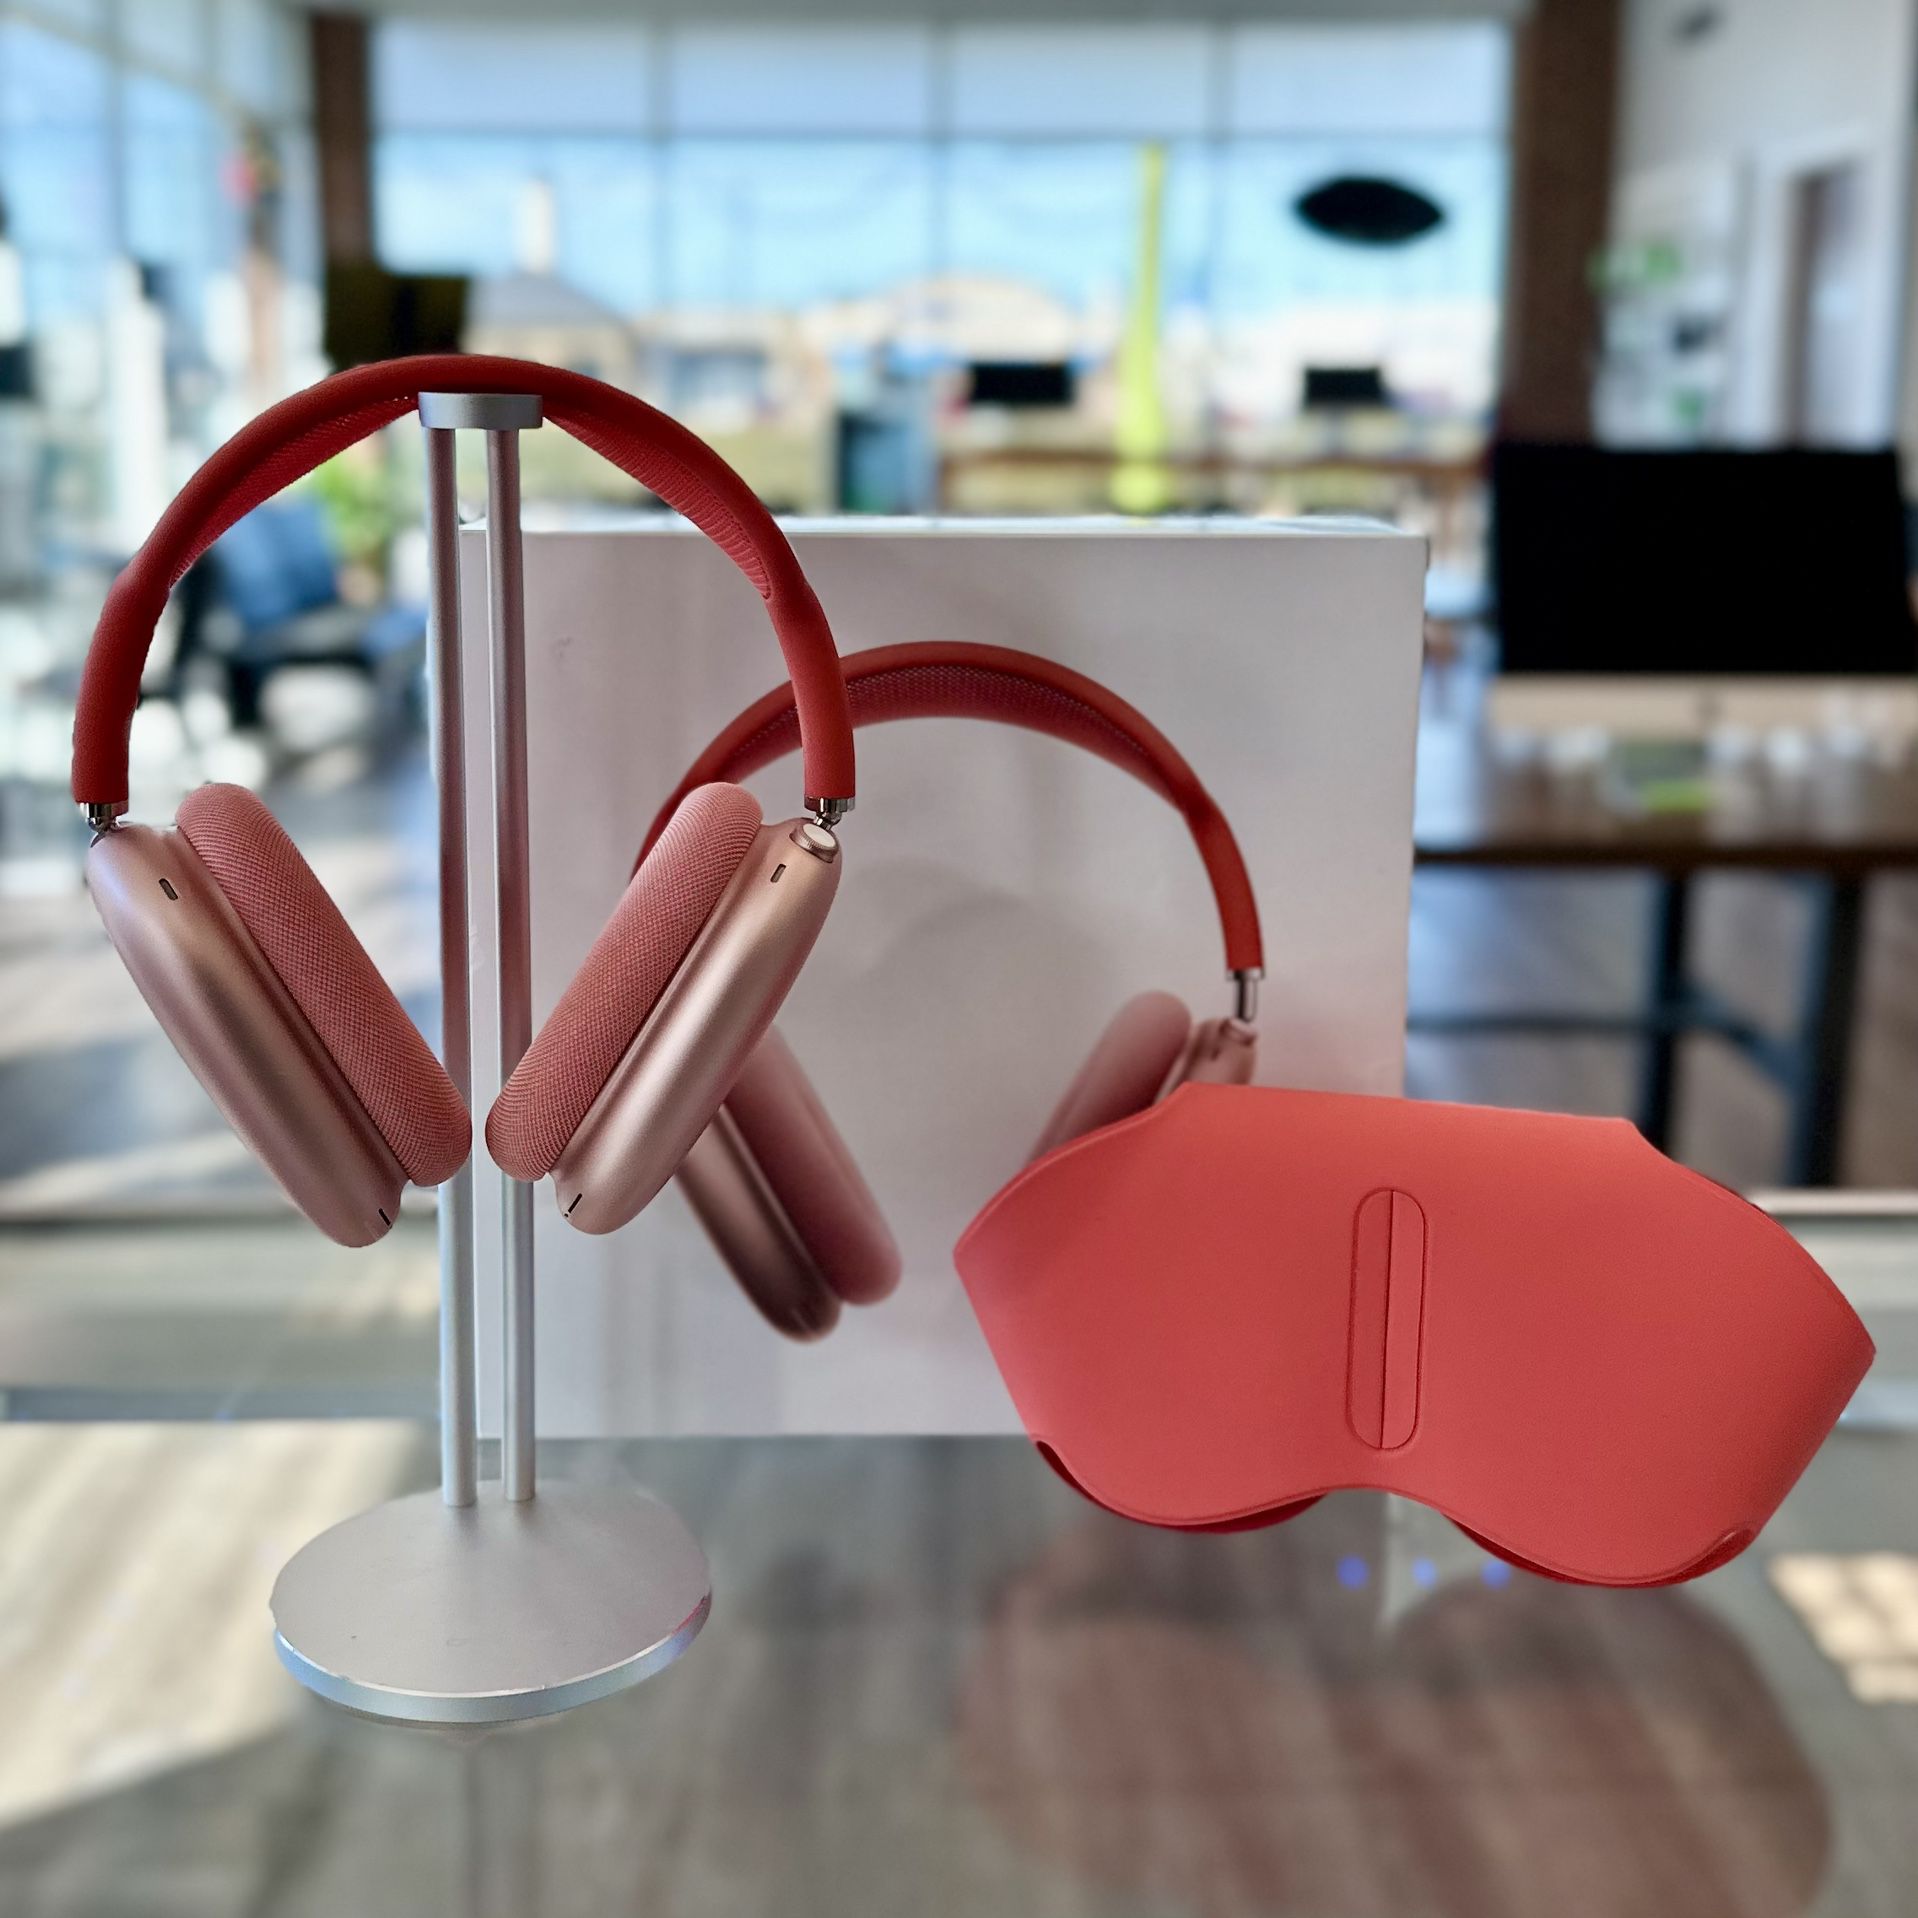 Apple AirPods Max (payments/trade optional)